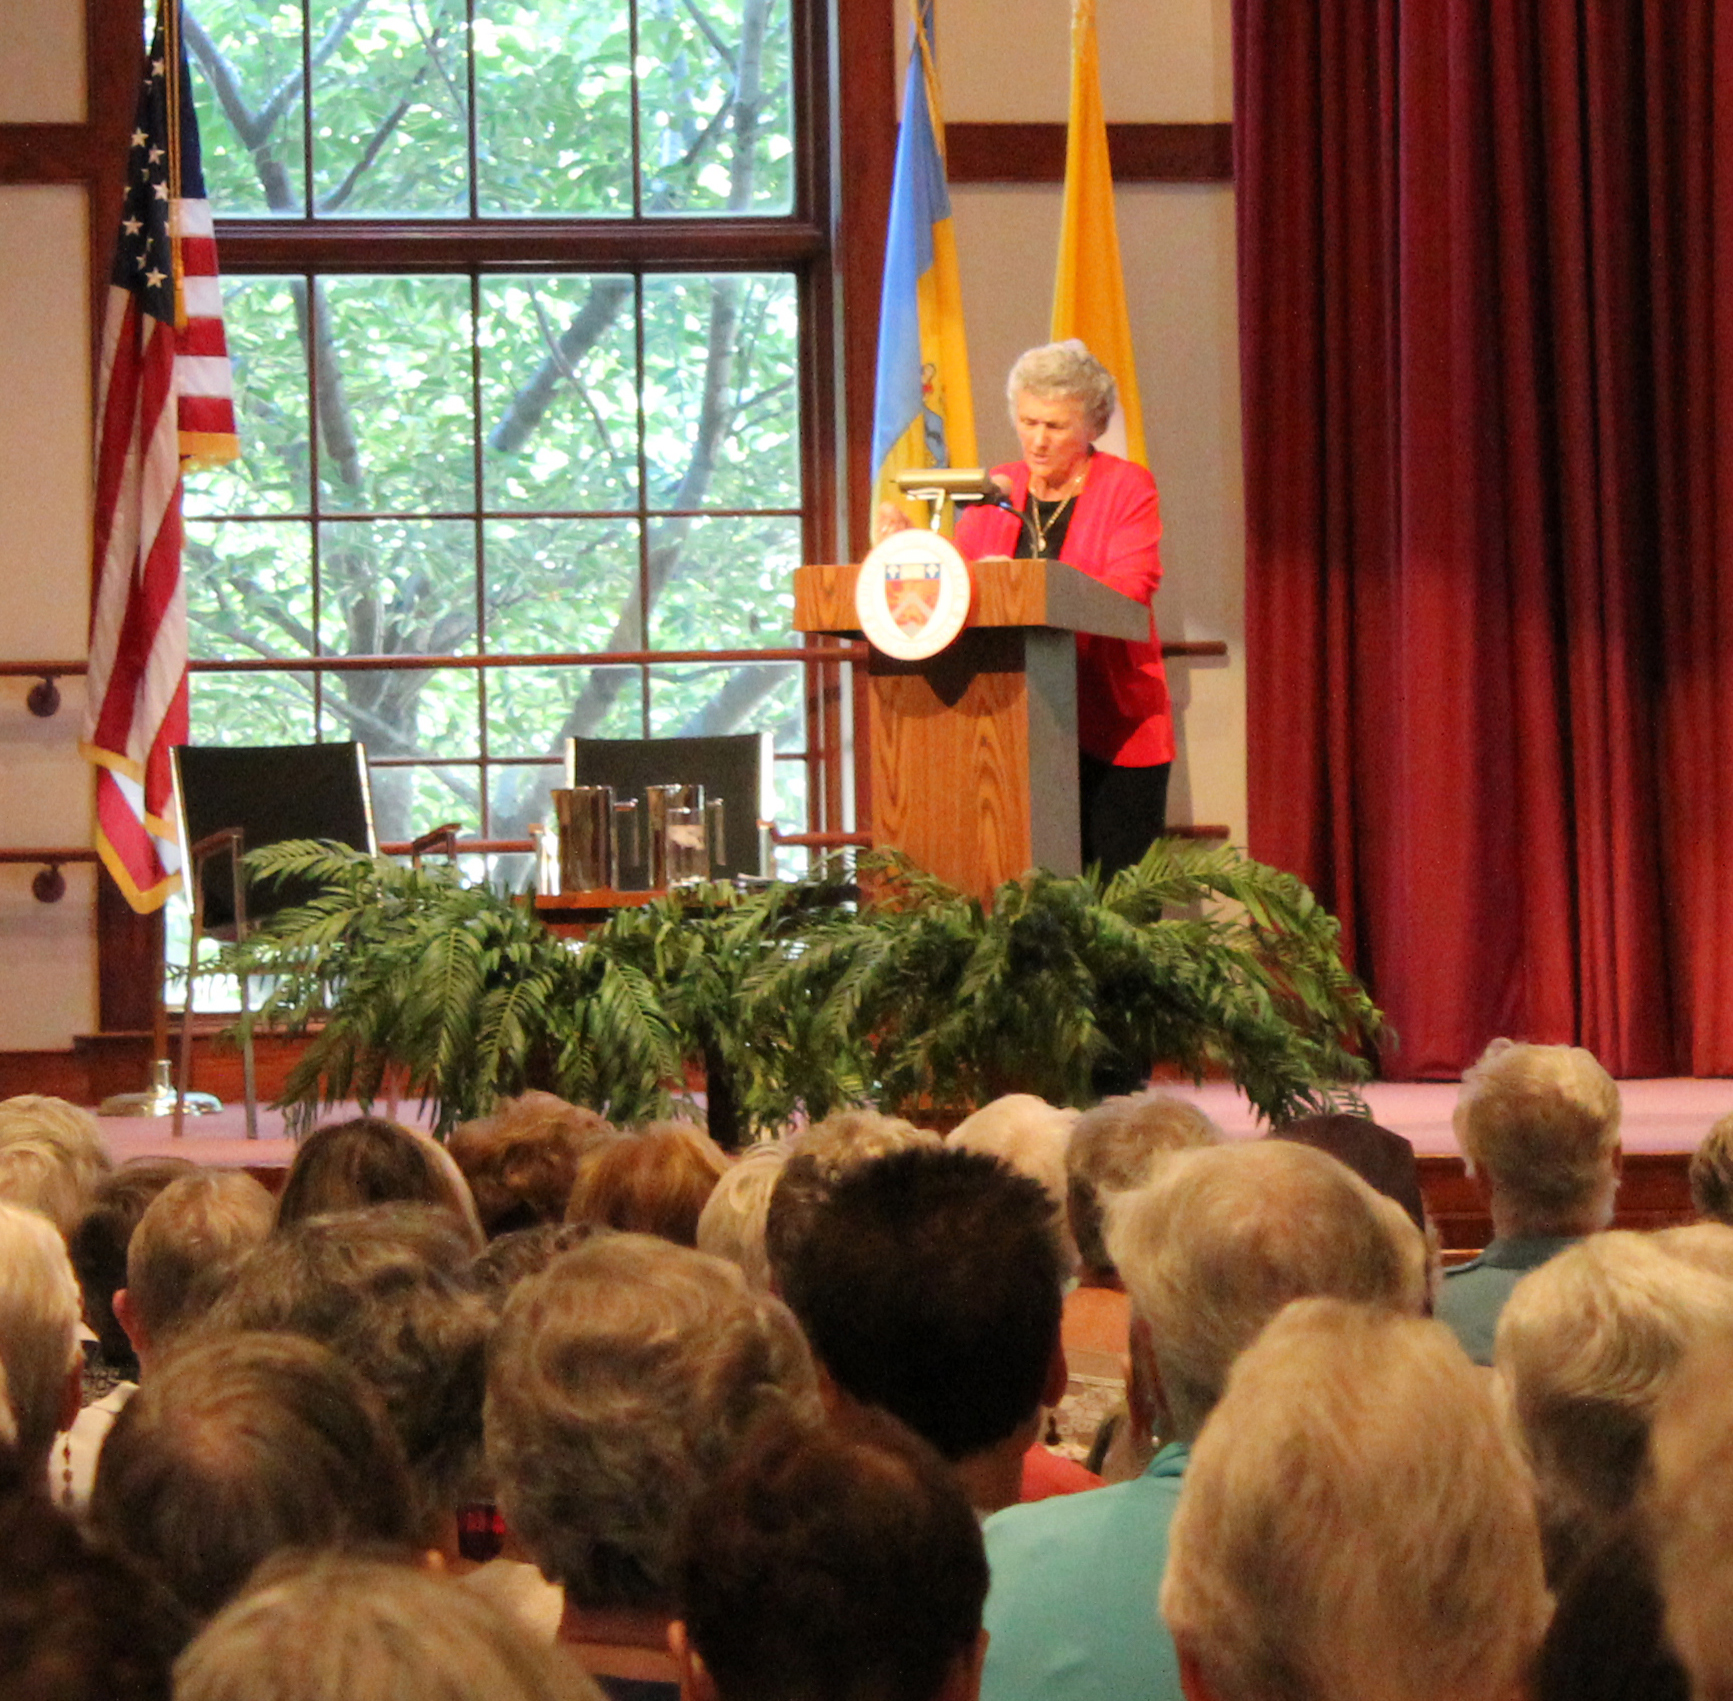 Sister Joan shares her message with the community. Photo credit: Colleen Gibson, SSJ